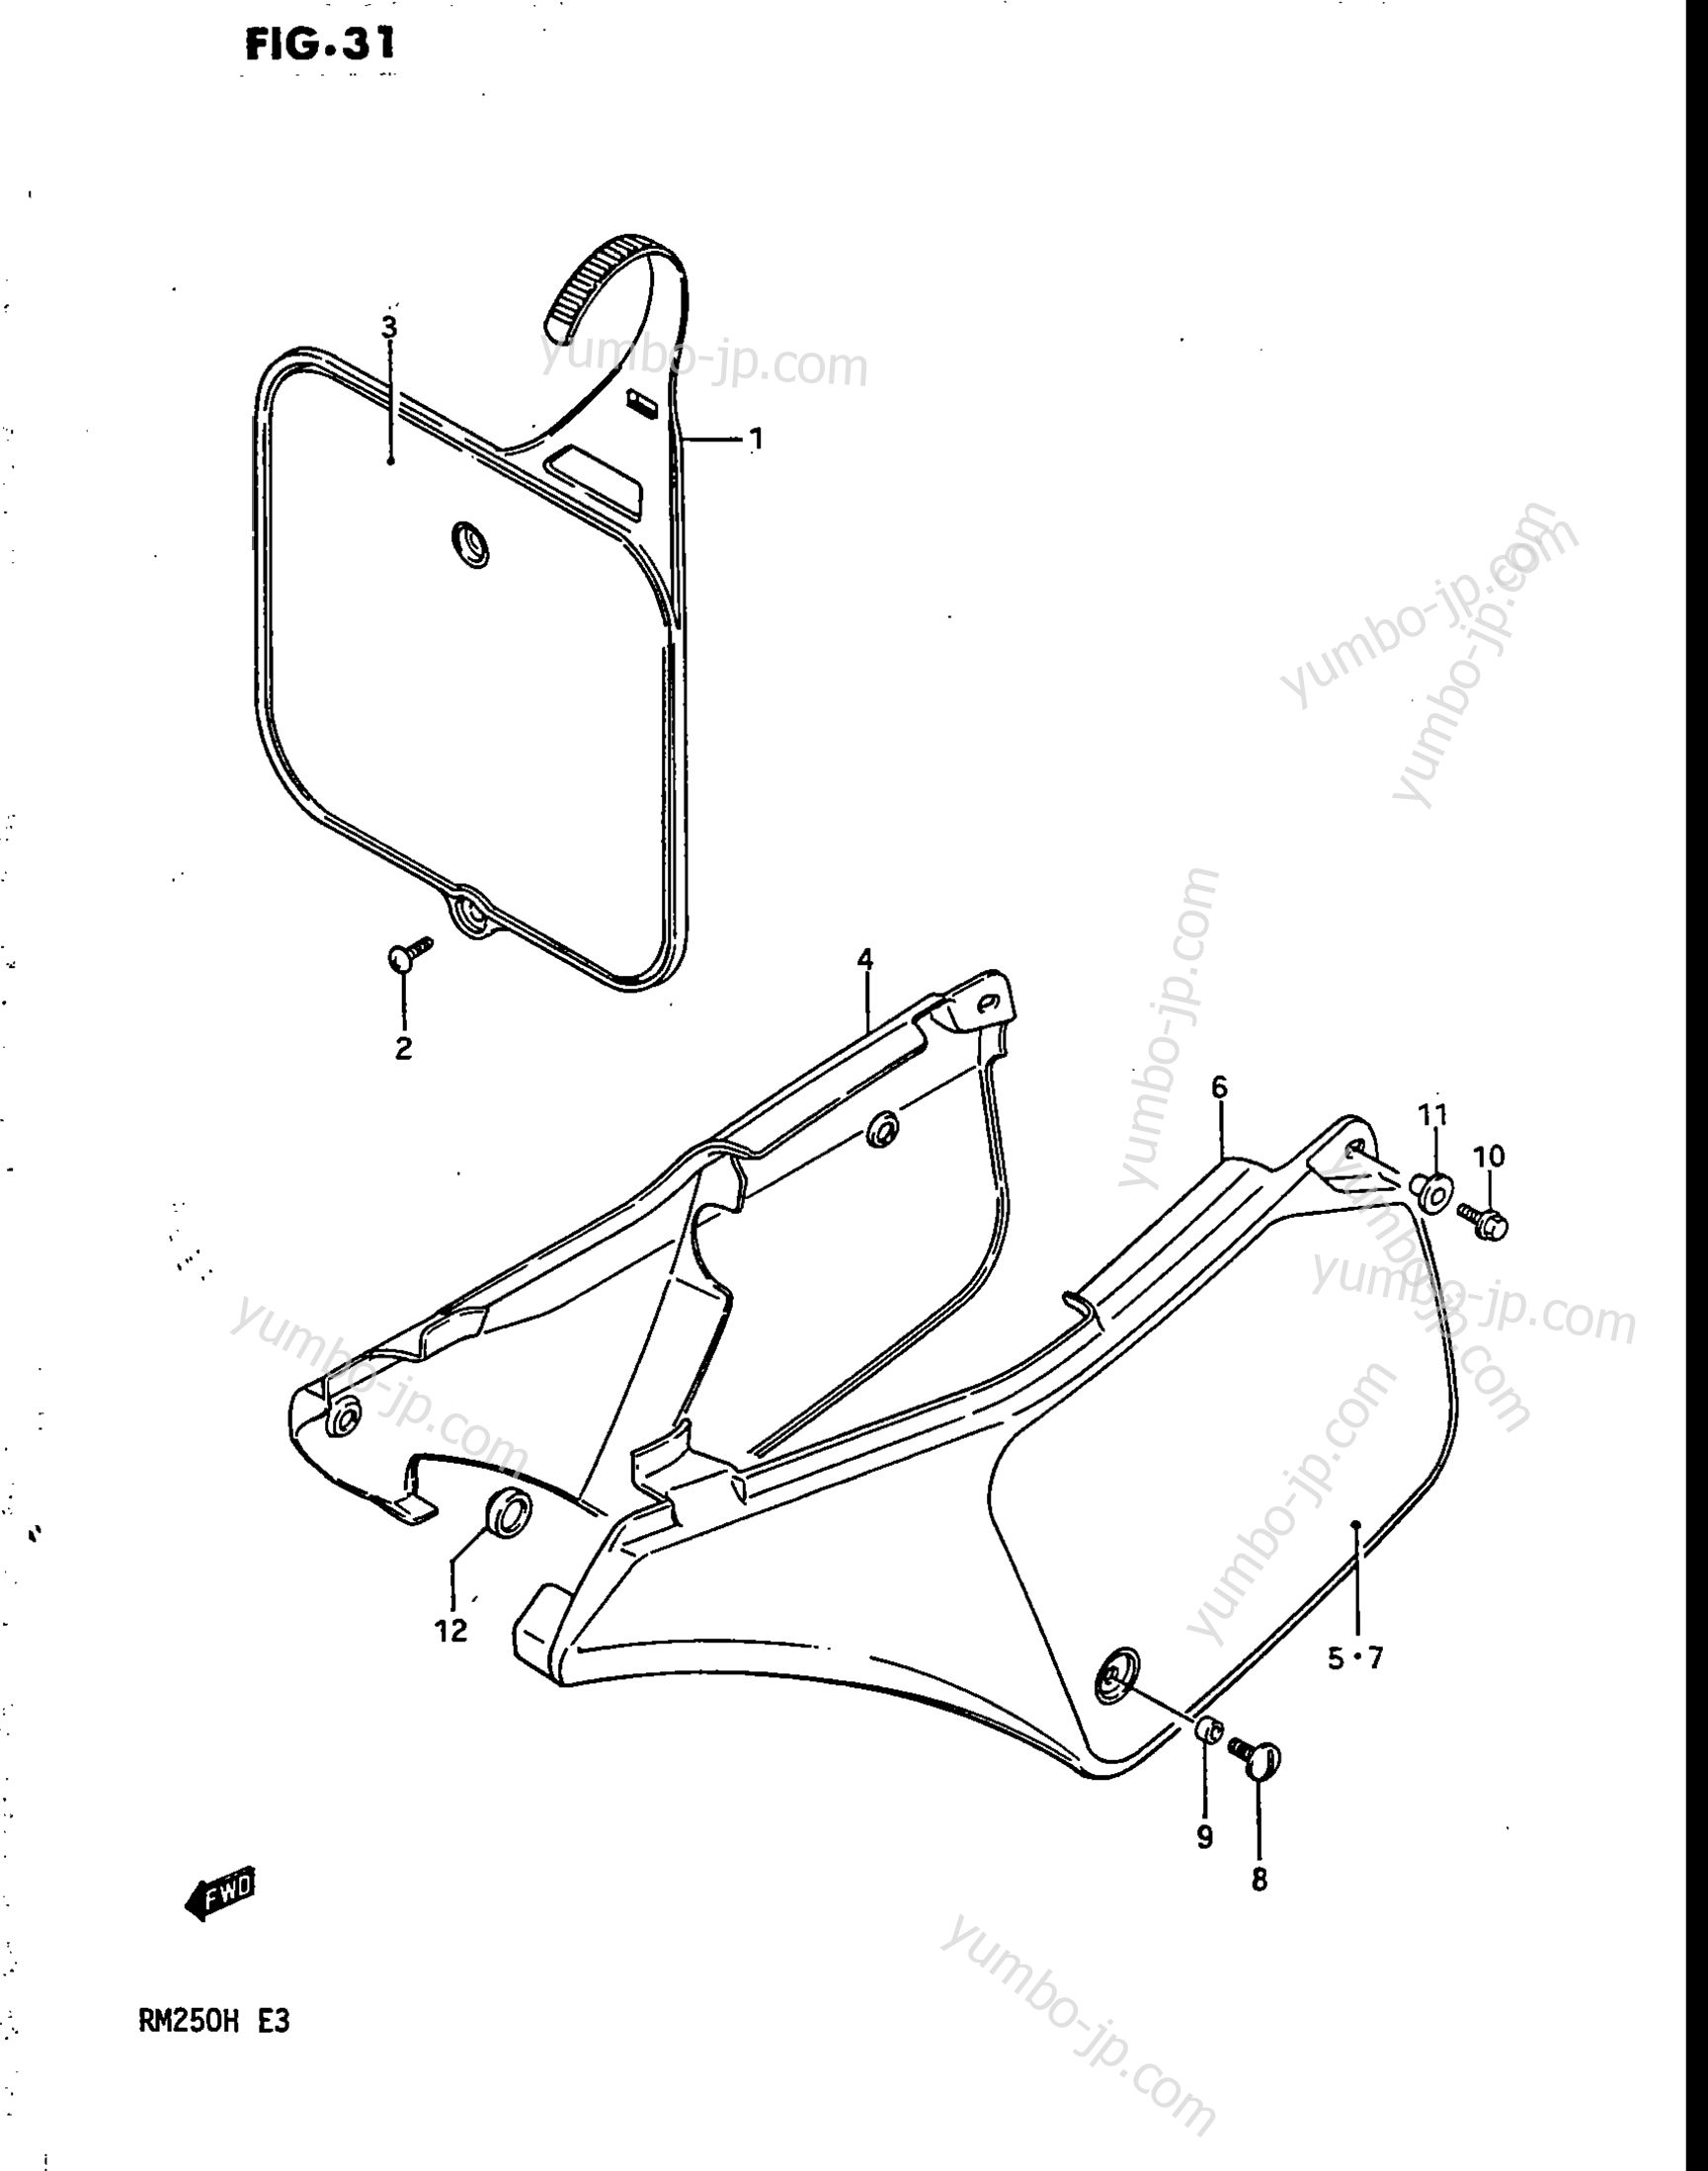 FRAME COVER for motorcycles SUZUKI RM250 1986 year